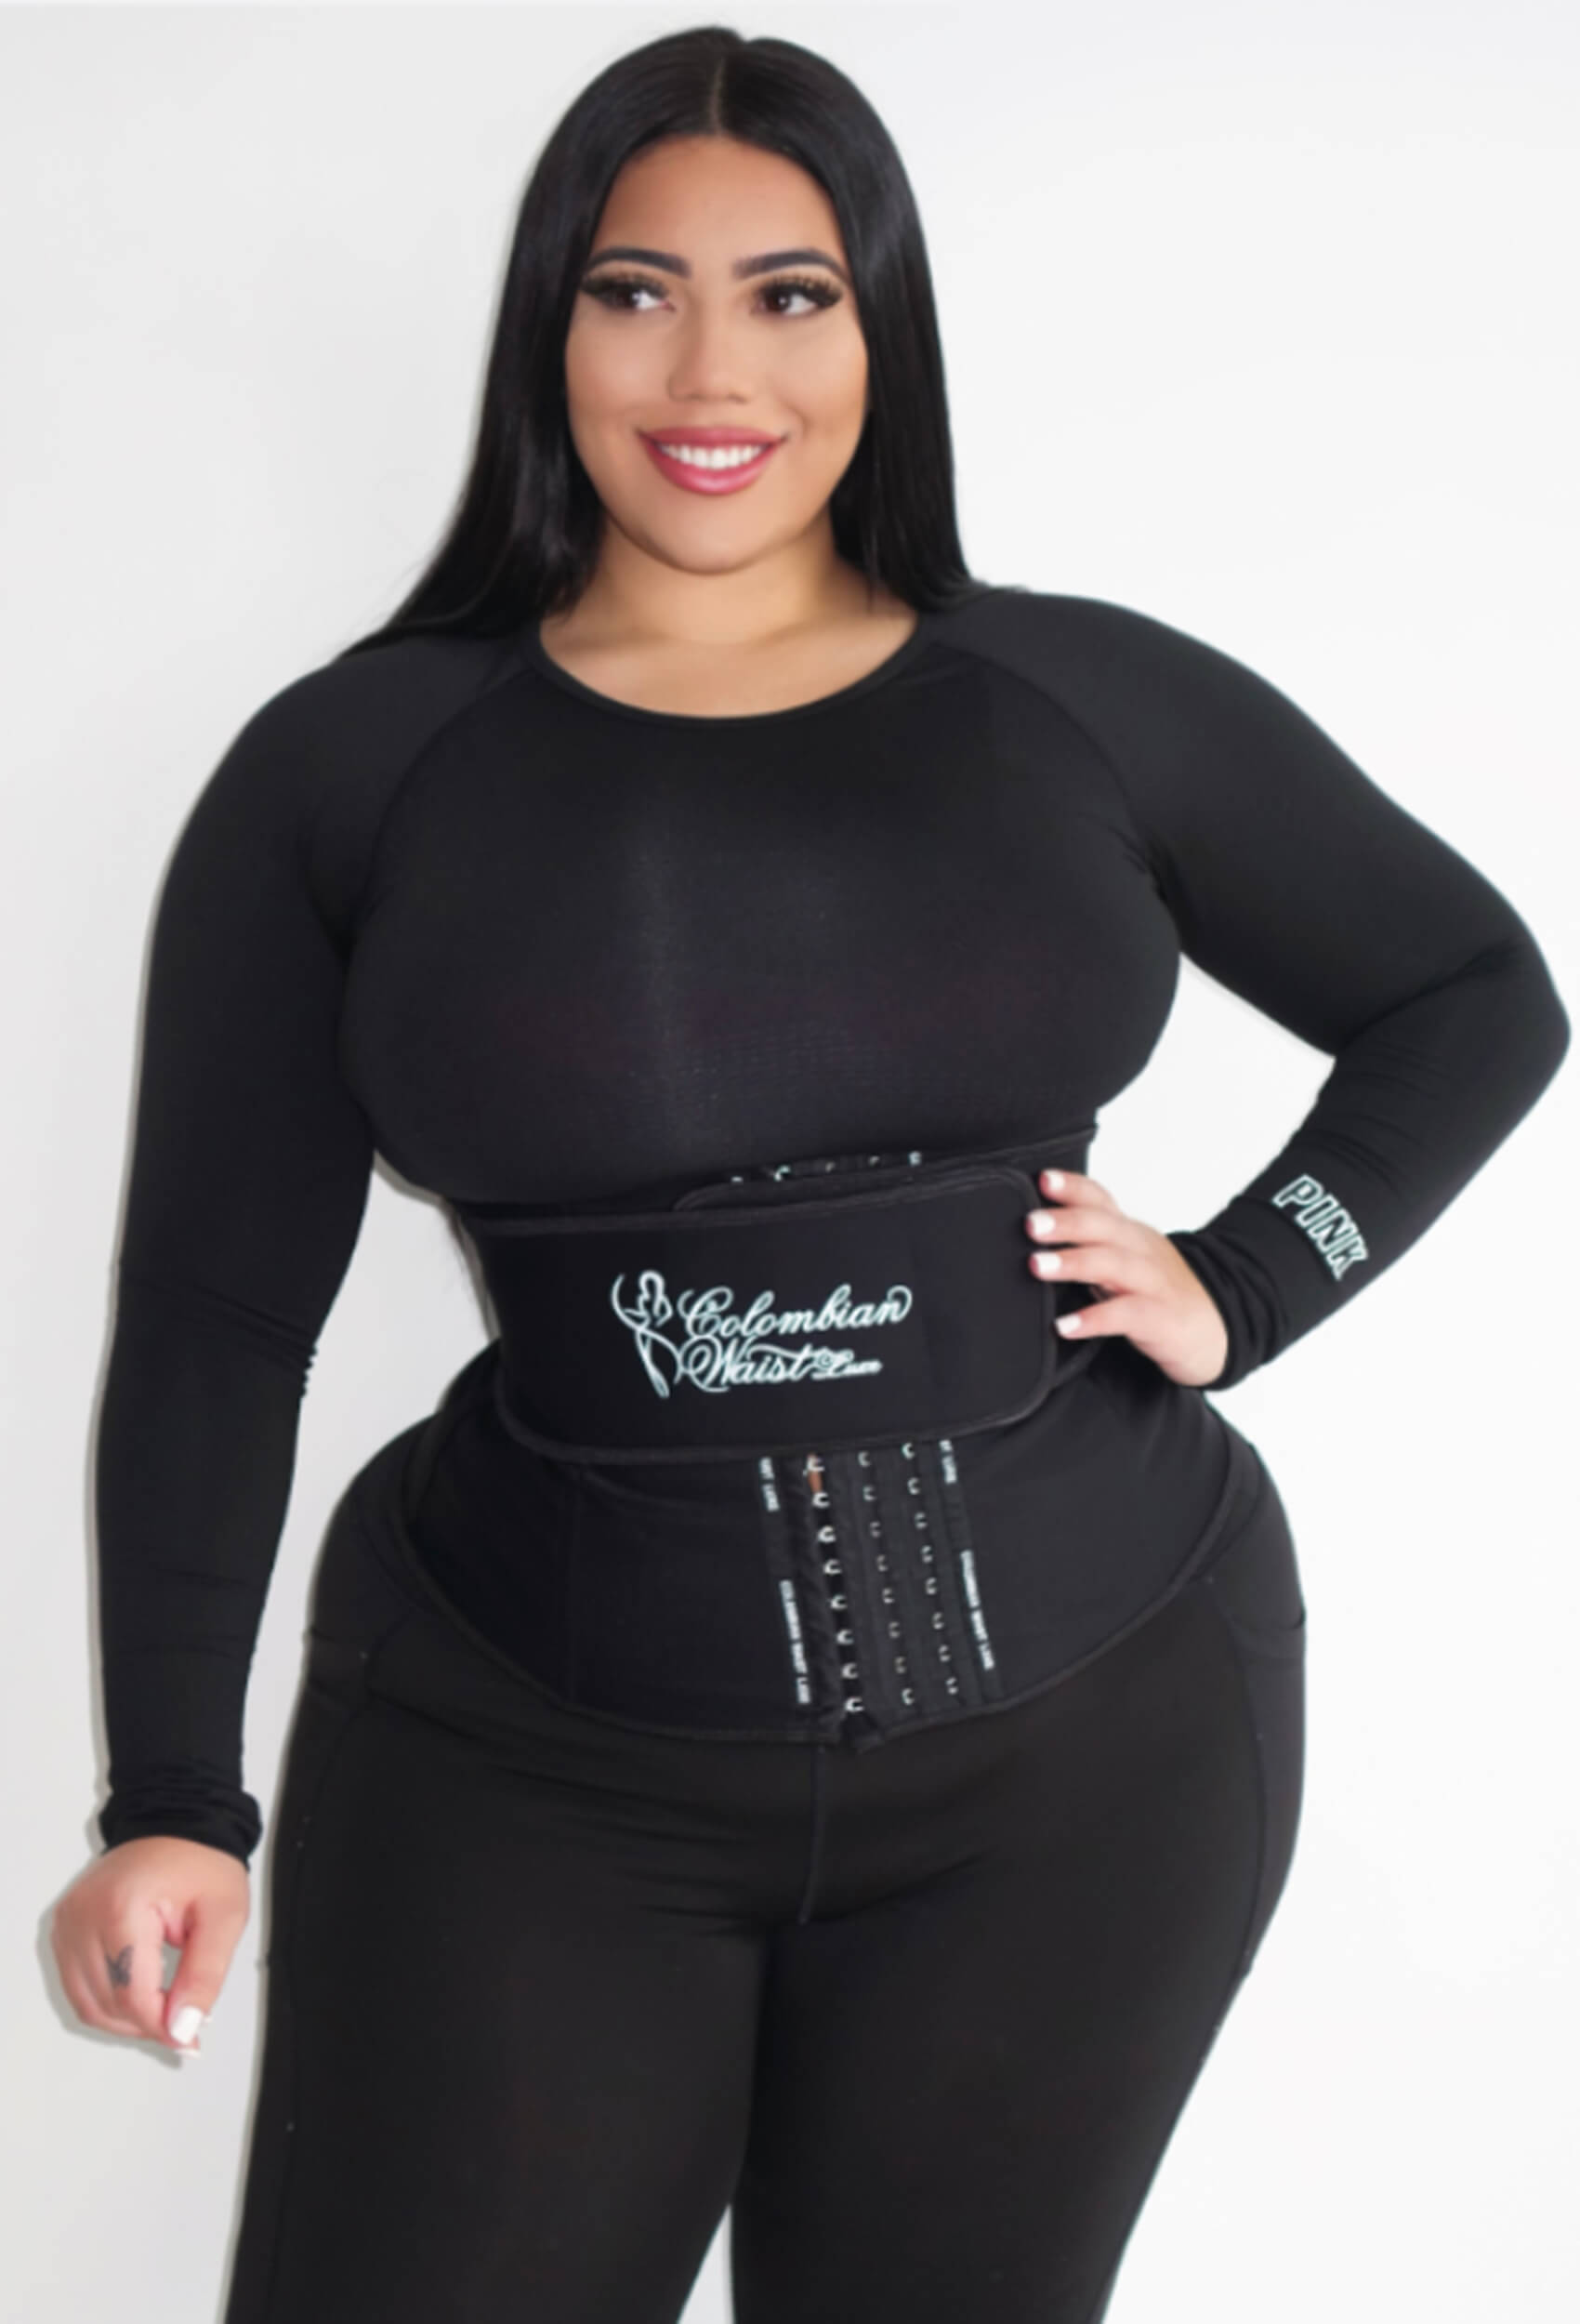 Colombian waist luxe - Slim Your Waist 1-3 inches instantly when you wear  it and flatten your midsection completely. ⏳ This Waist Trainer In  Particular Is Great For Working out. 💖 our